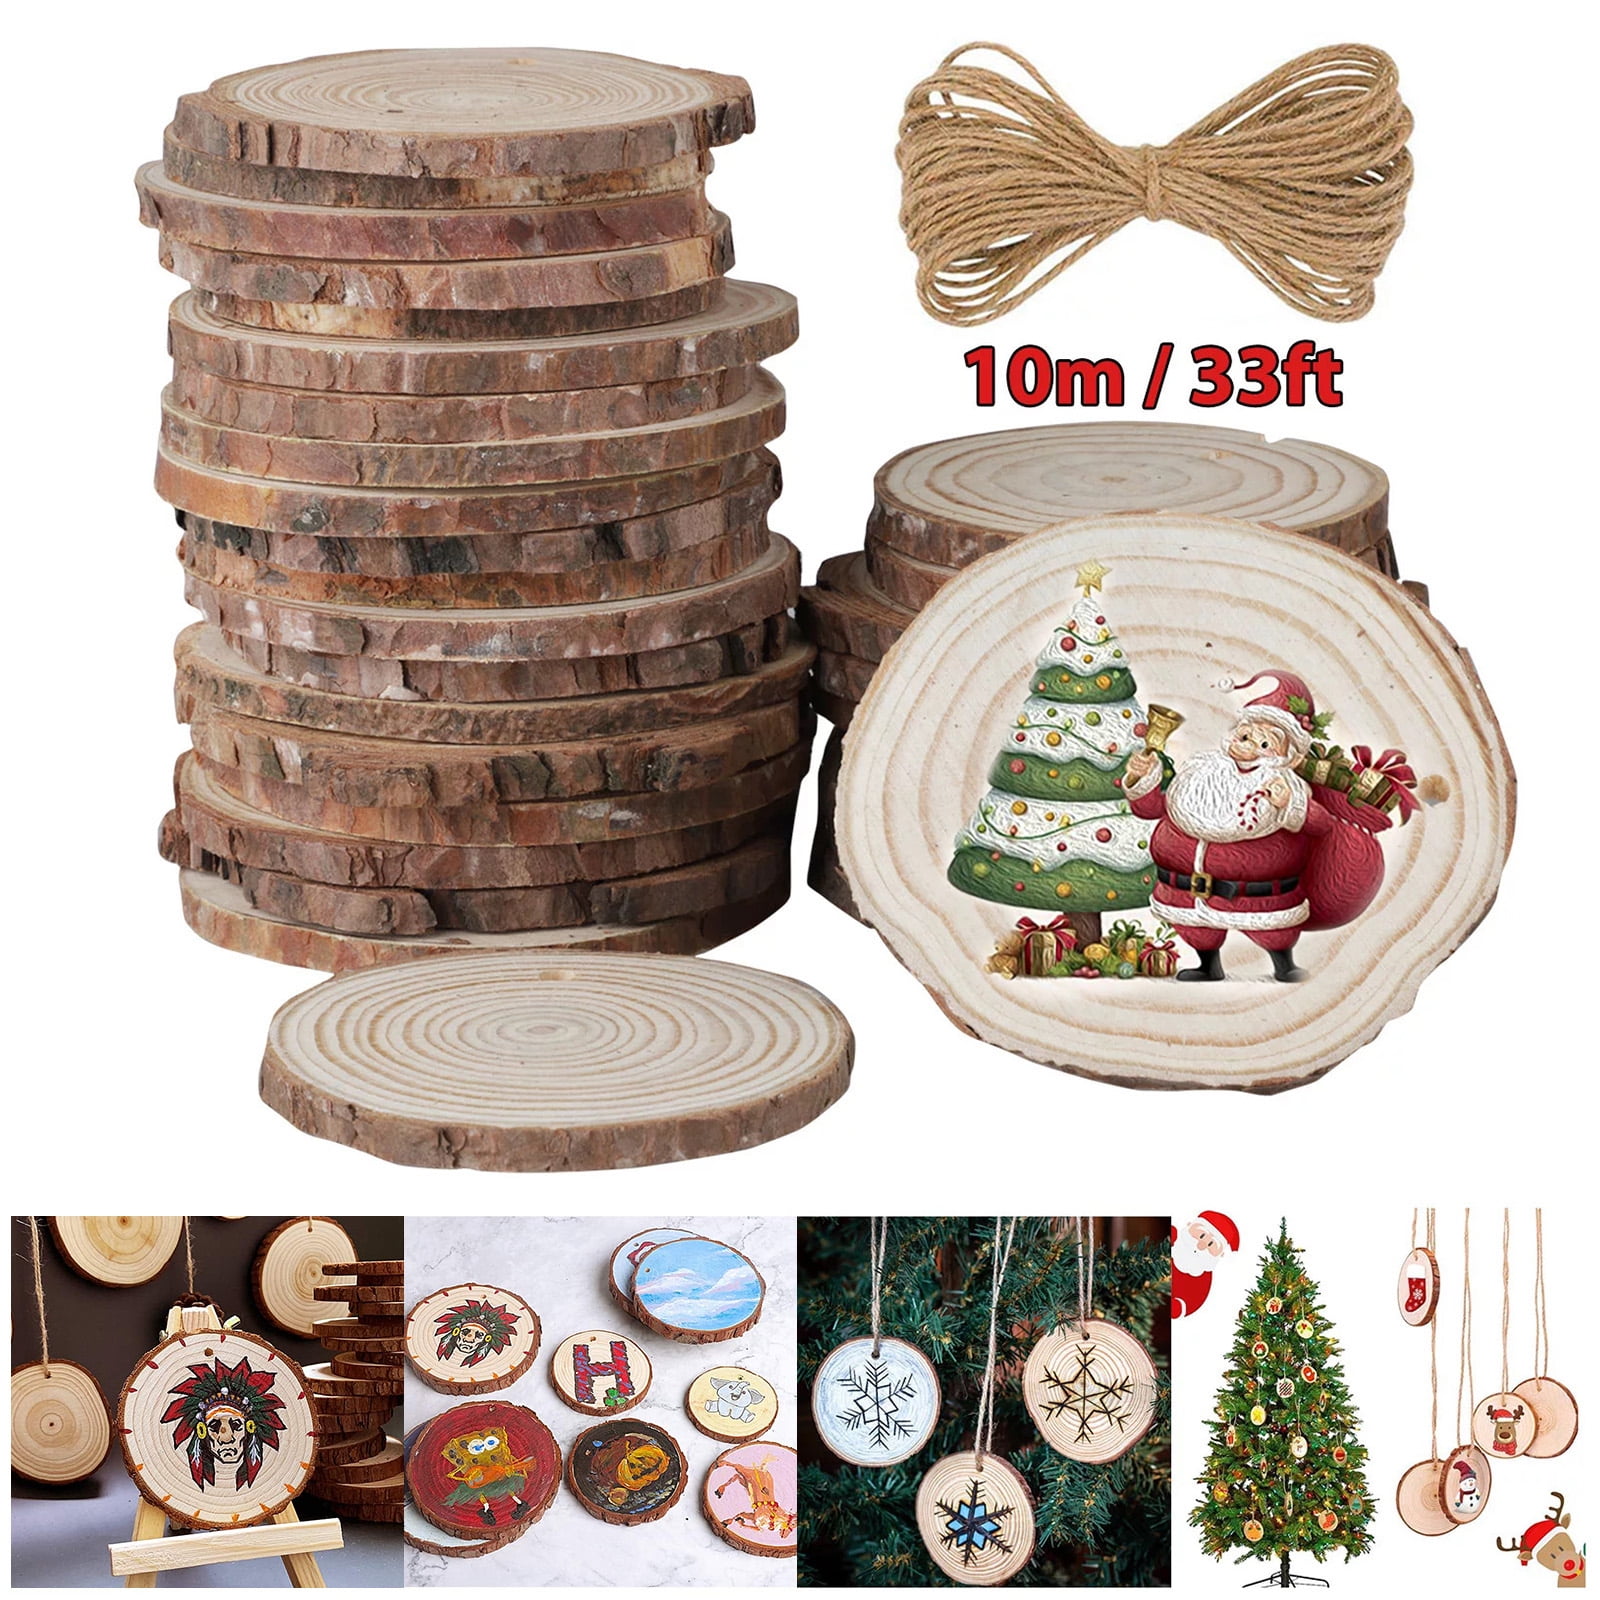 Christmas Ornaments Wall Art Natural Wood Slices 30Pcs 2.4-2.8 inch With Twine String Rustic Wedding Decor Wood Discs With Barks And Hole For DIY Crafts Wood Burning And Painting Project 